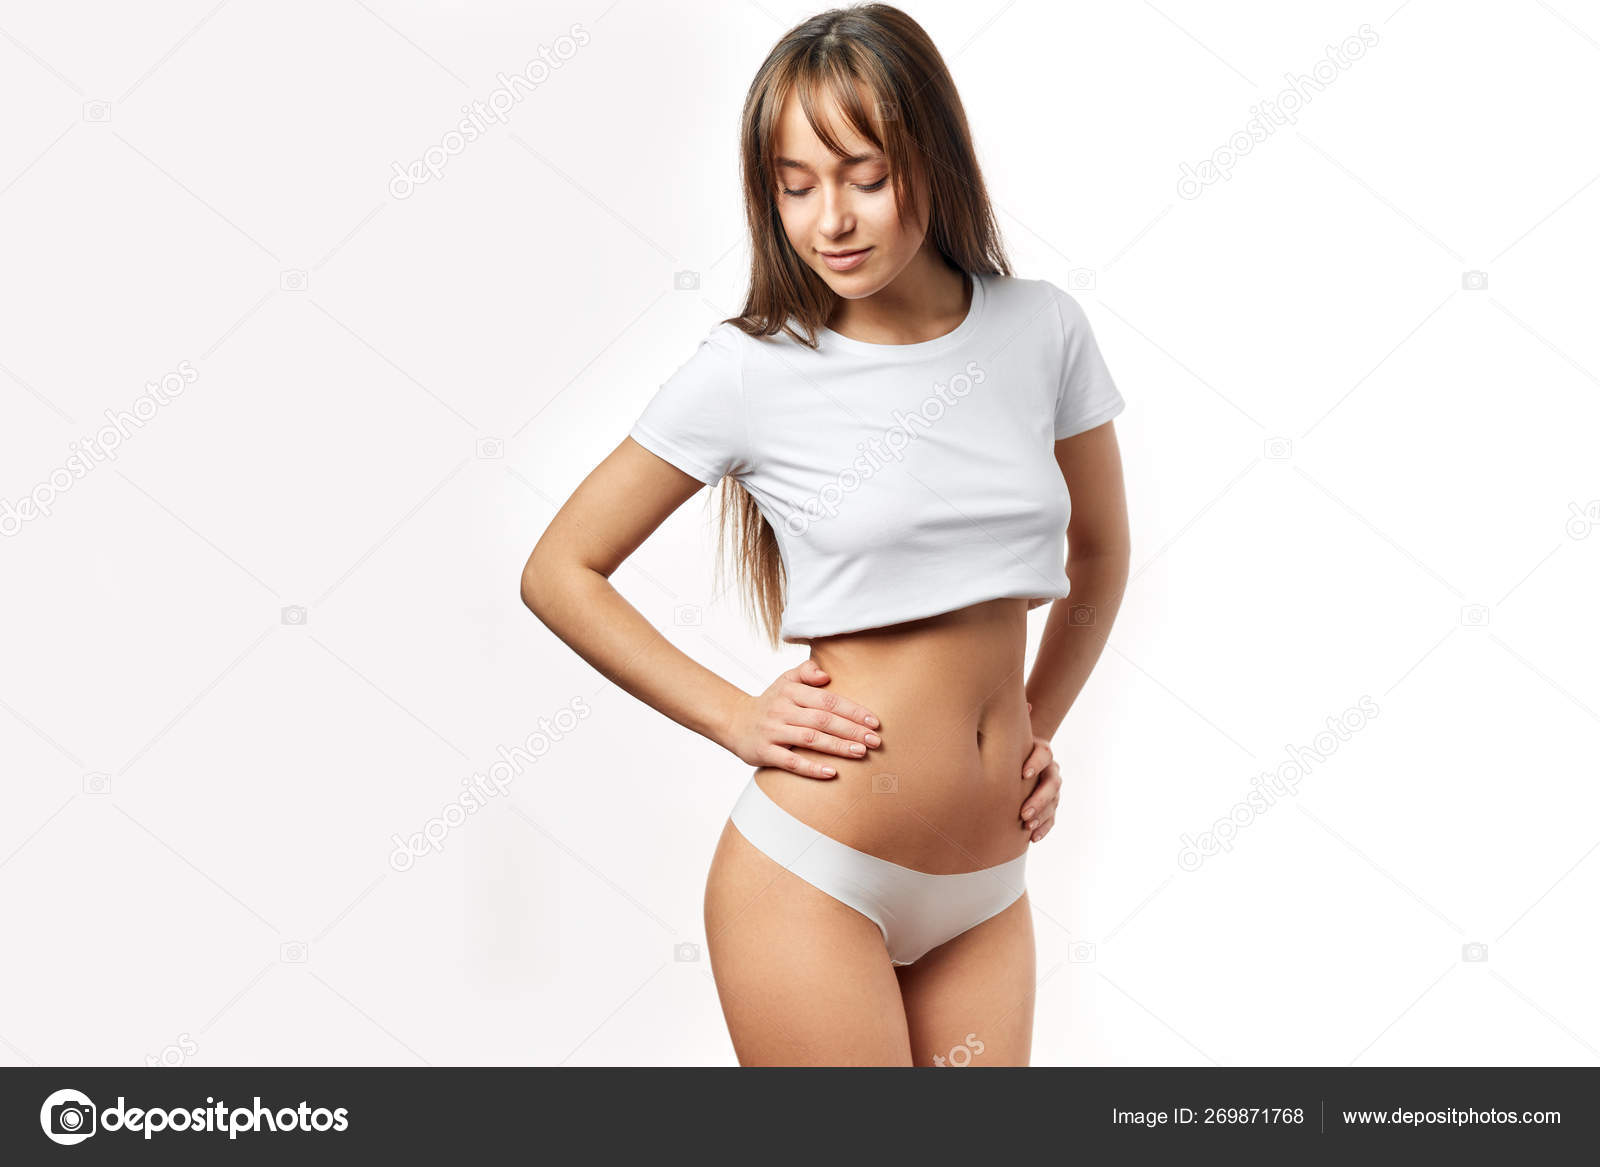 Woman Waist. Girl With Perfect Body Shape, Flat Belly In Underwear